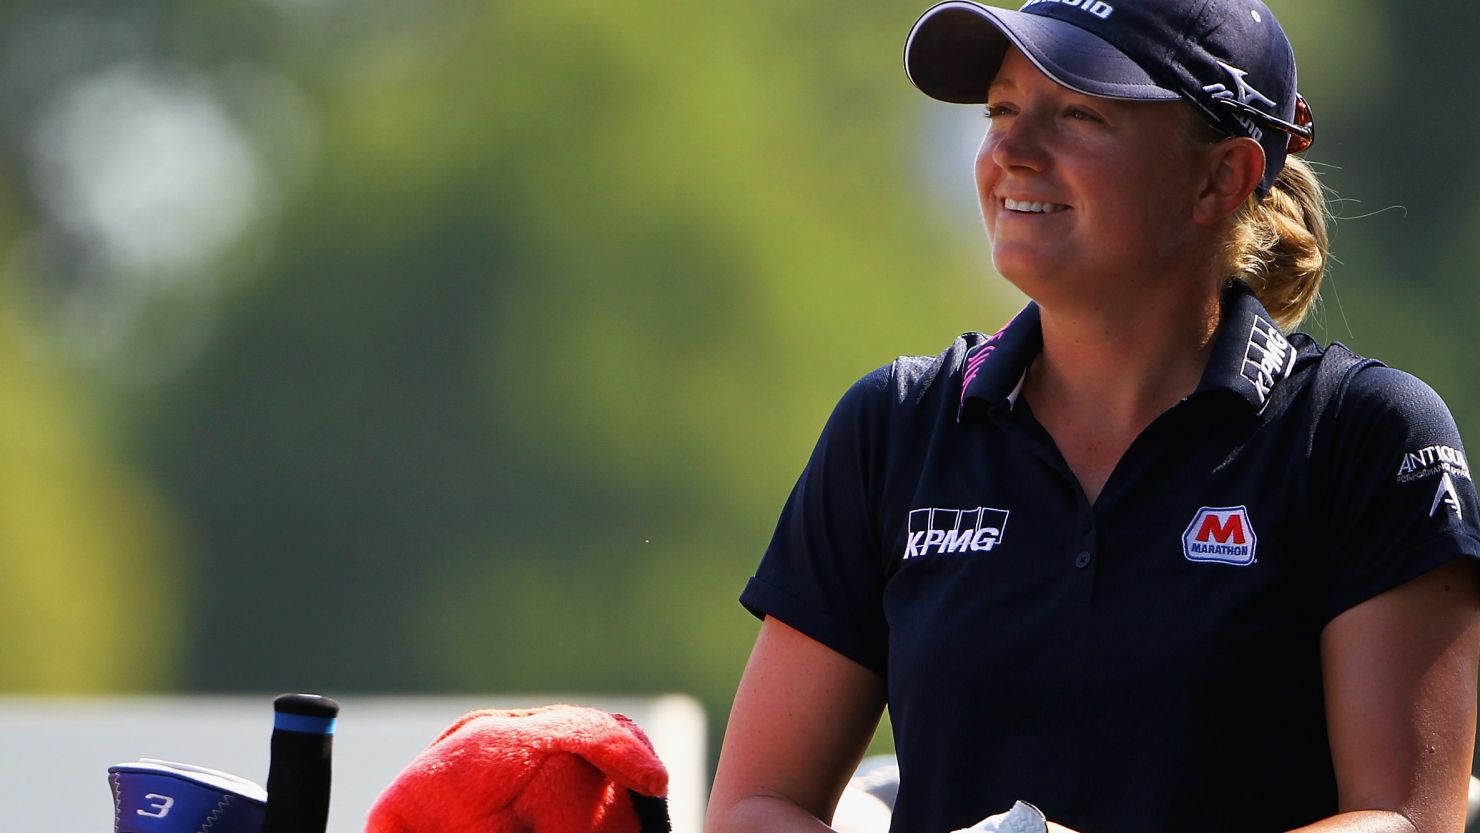 Stacy Lewis was in confident mood as she maintained her lead at the Evian Masters in France.